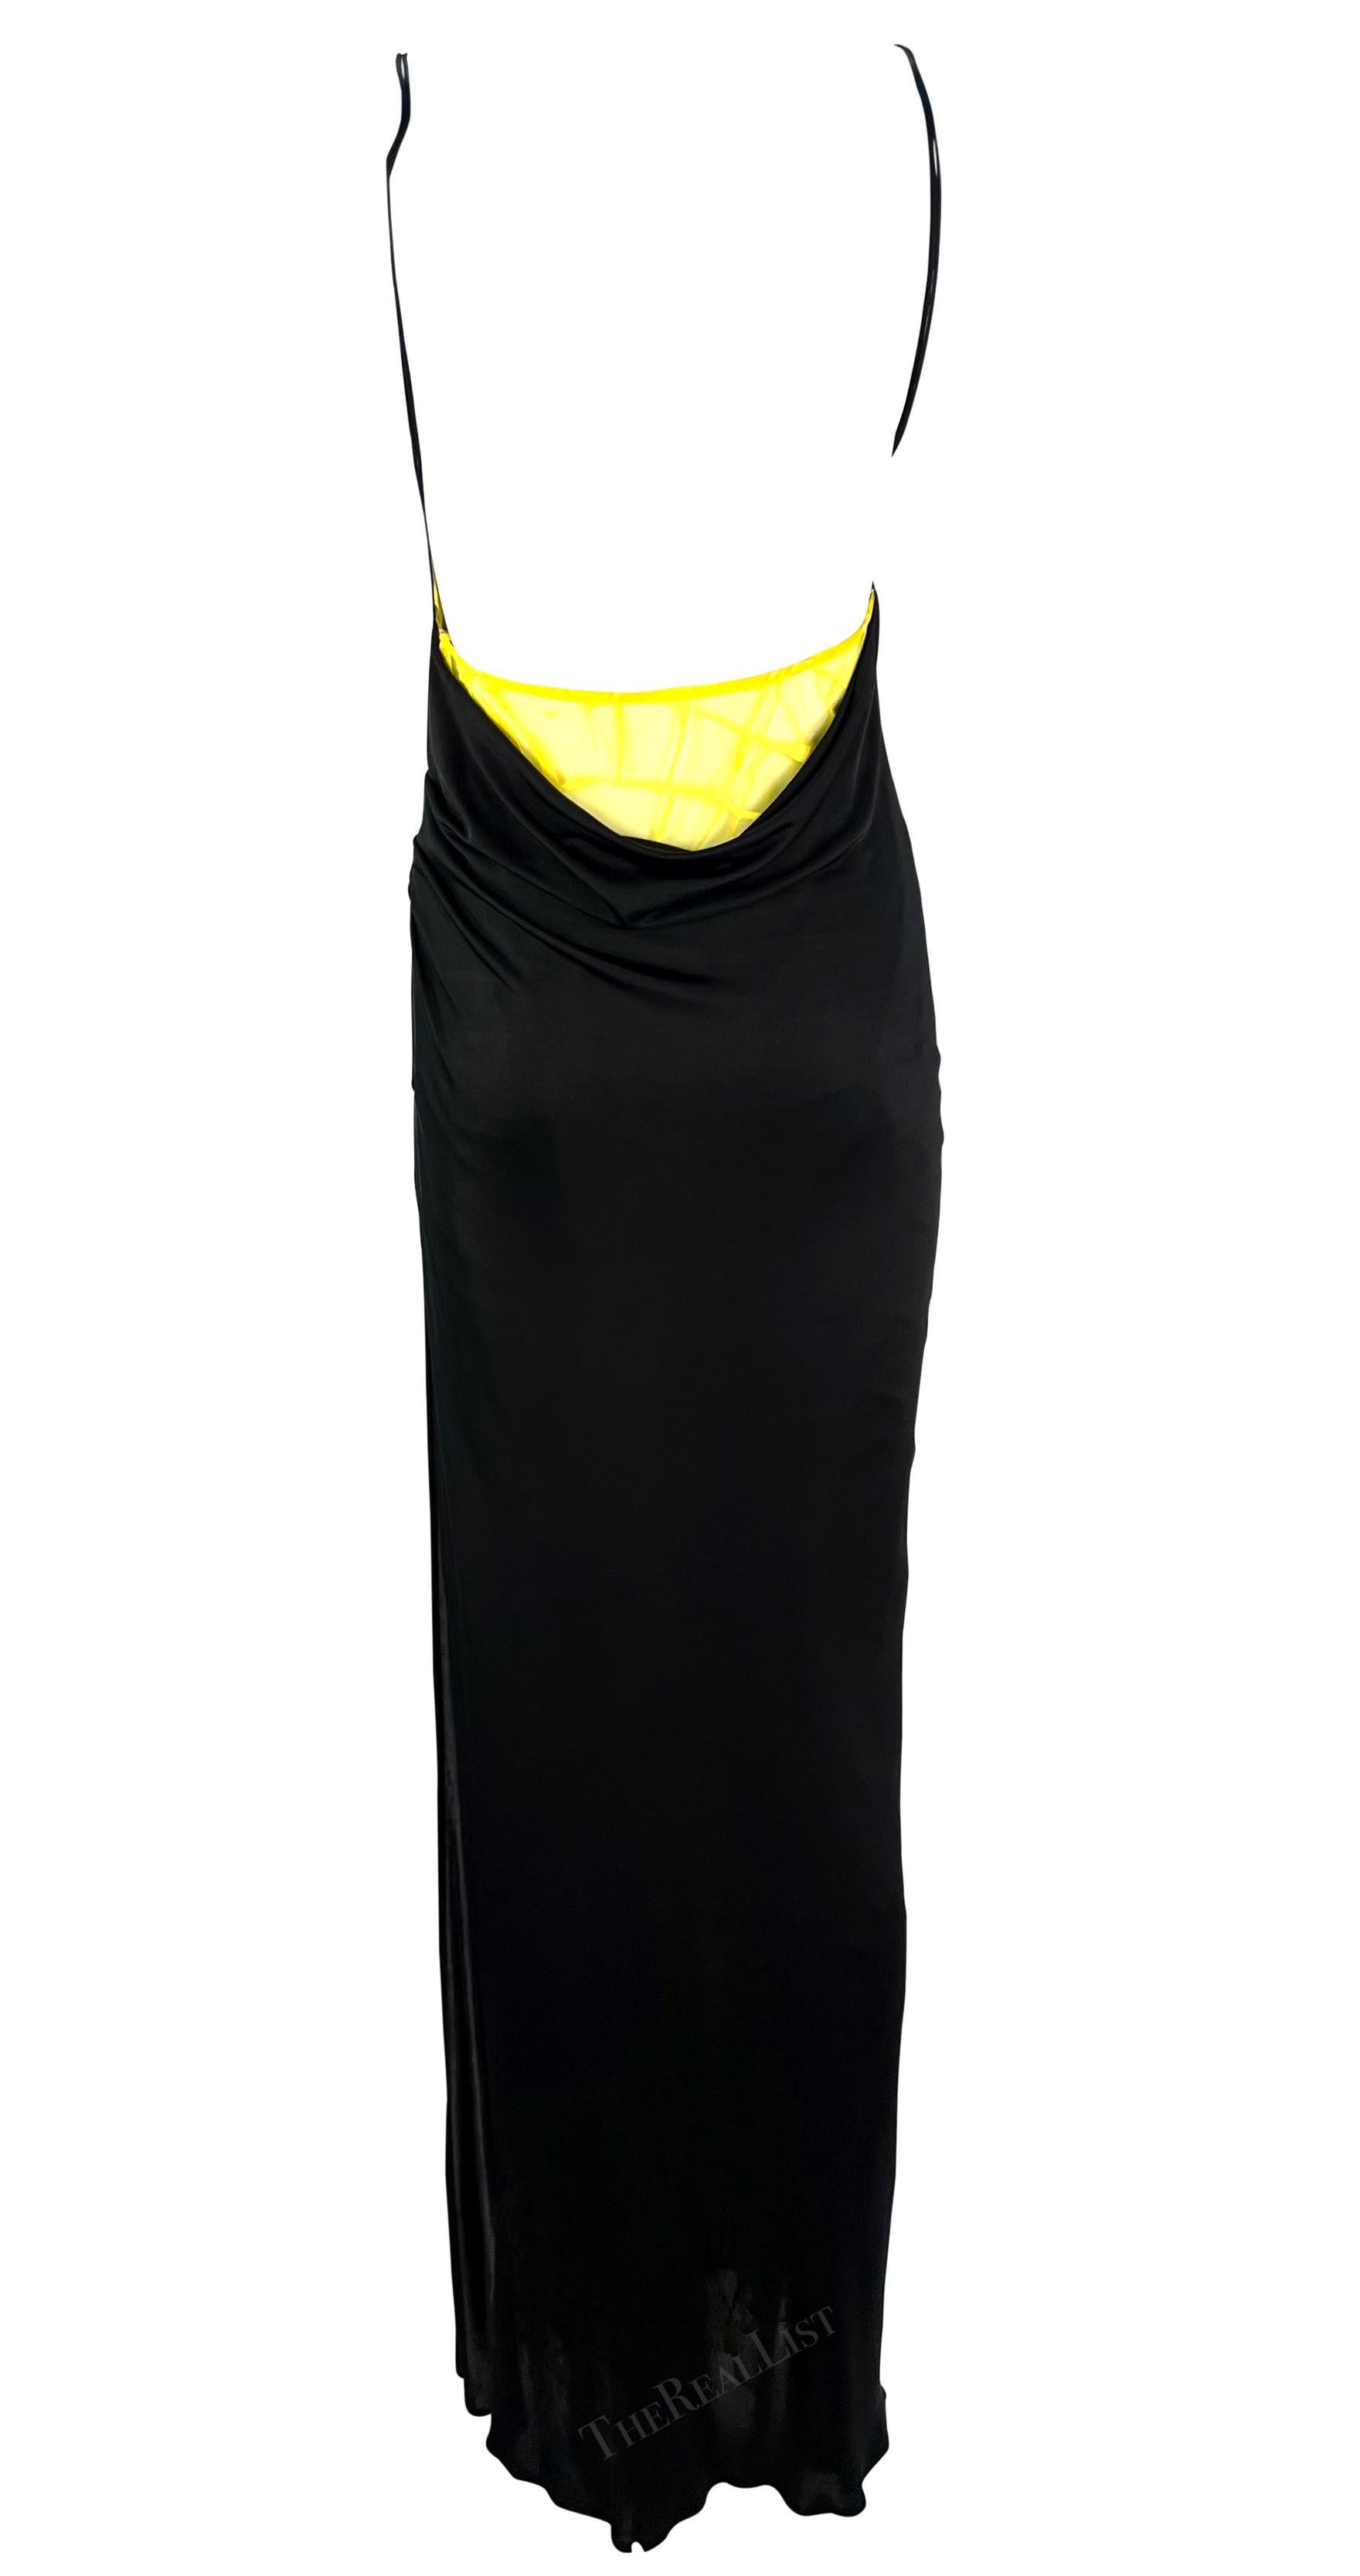 S/S 1999 Gianni Versace by Donatella Ruched Black High-Slit Yellow Mesh Gown In Excellent Condition For Sale In West Hollywood, CA